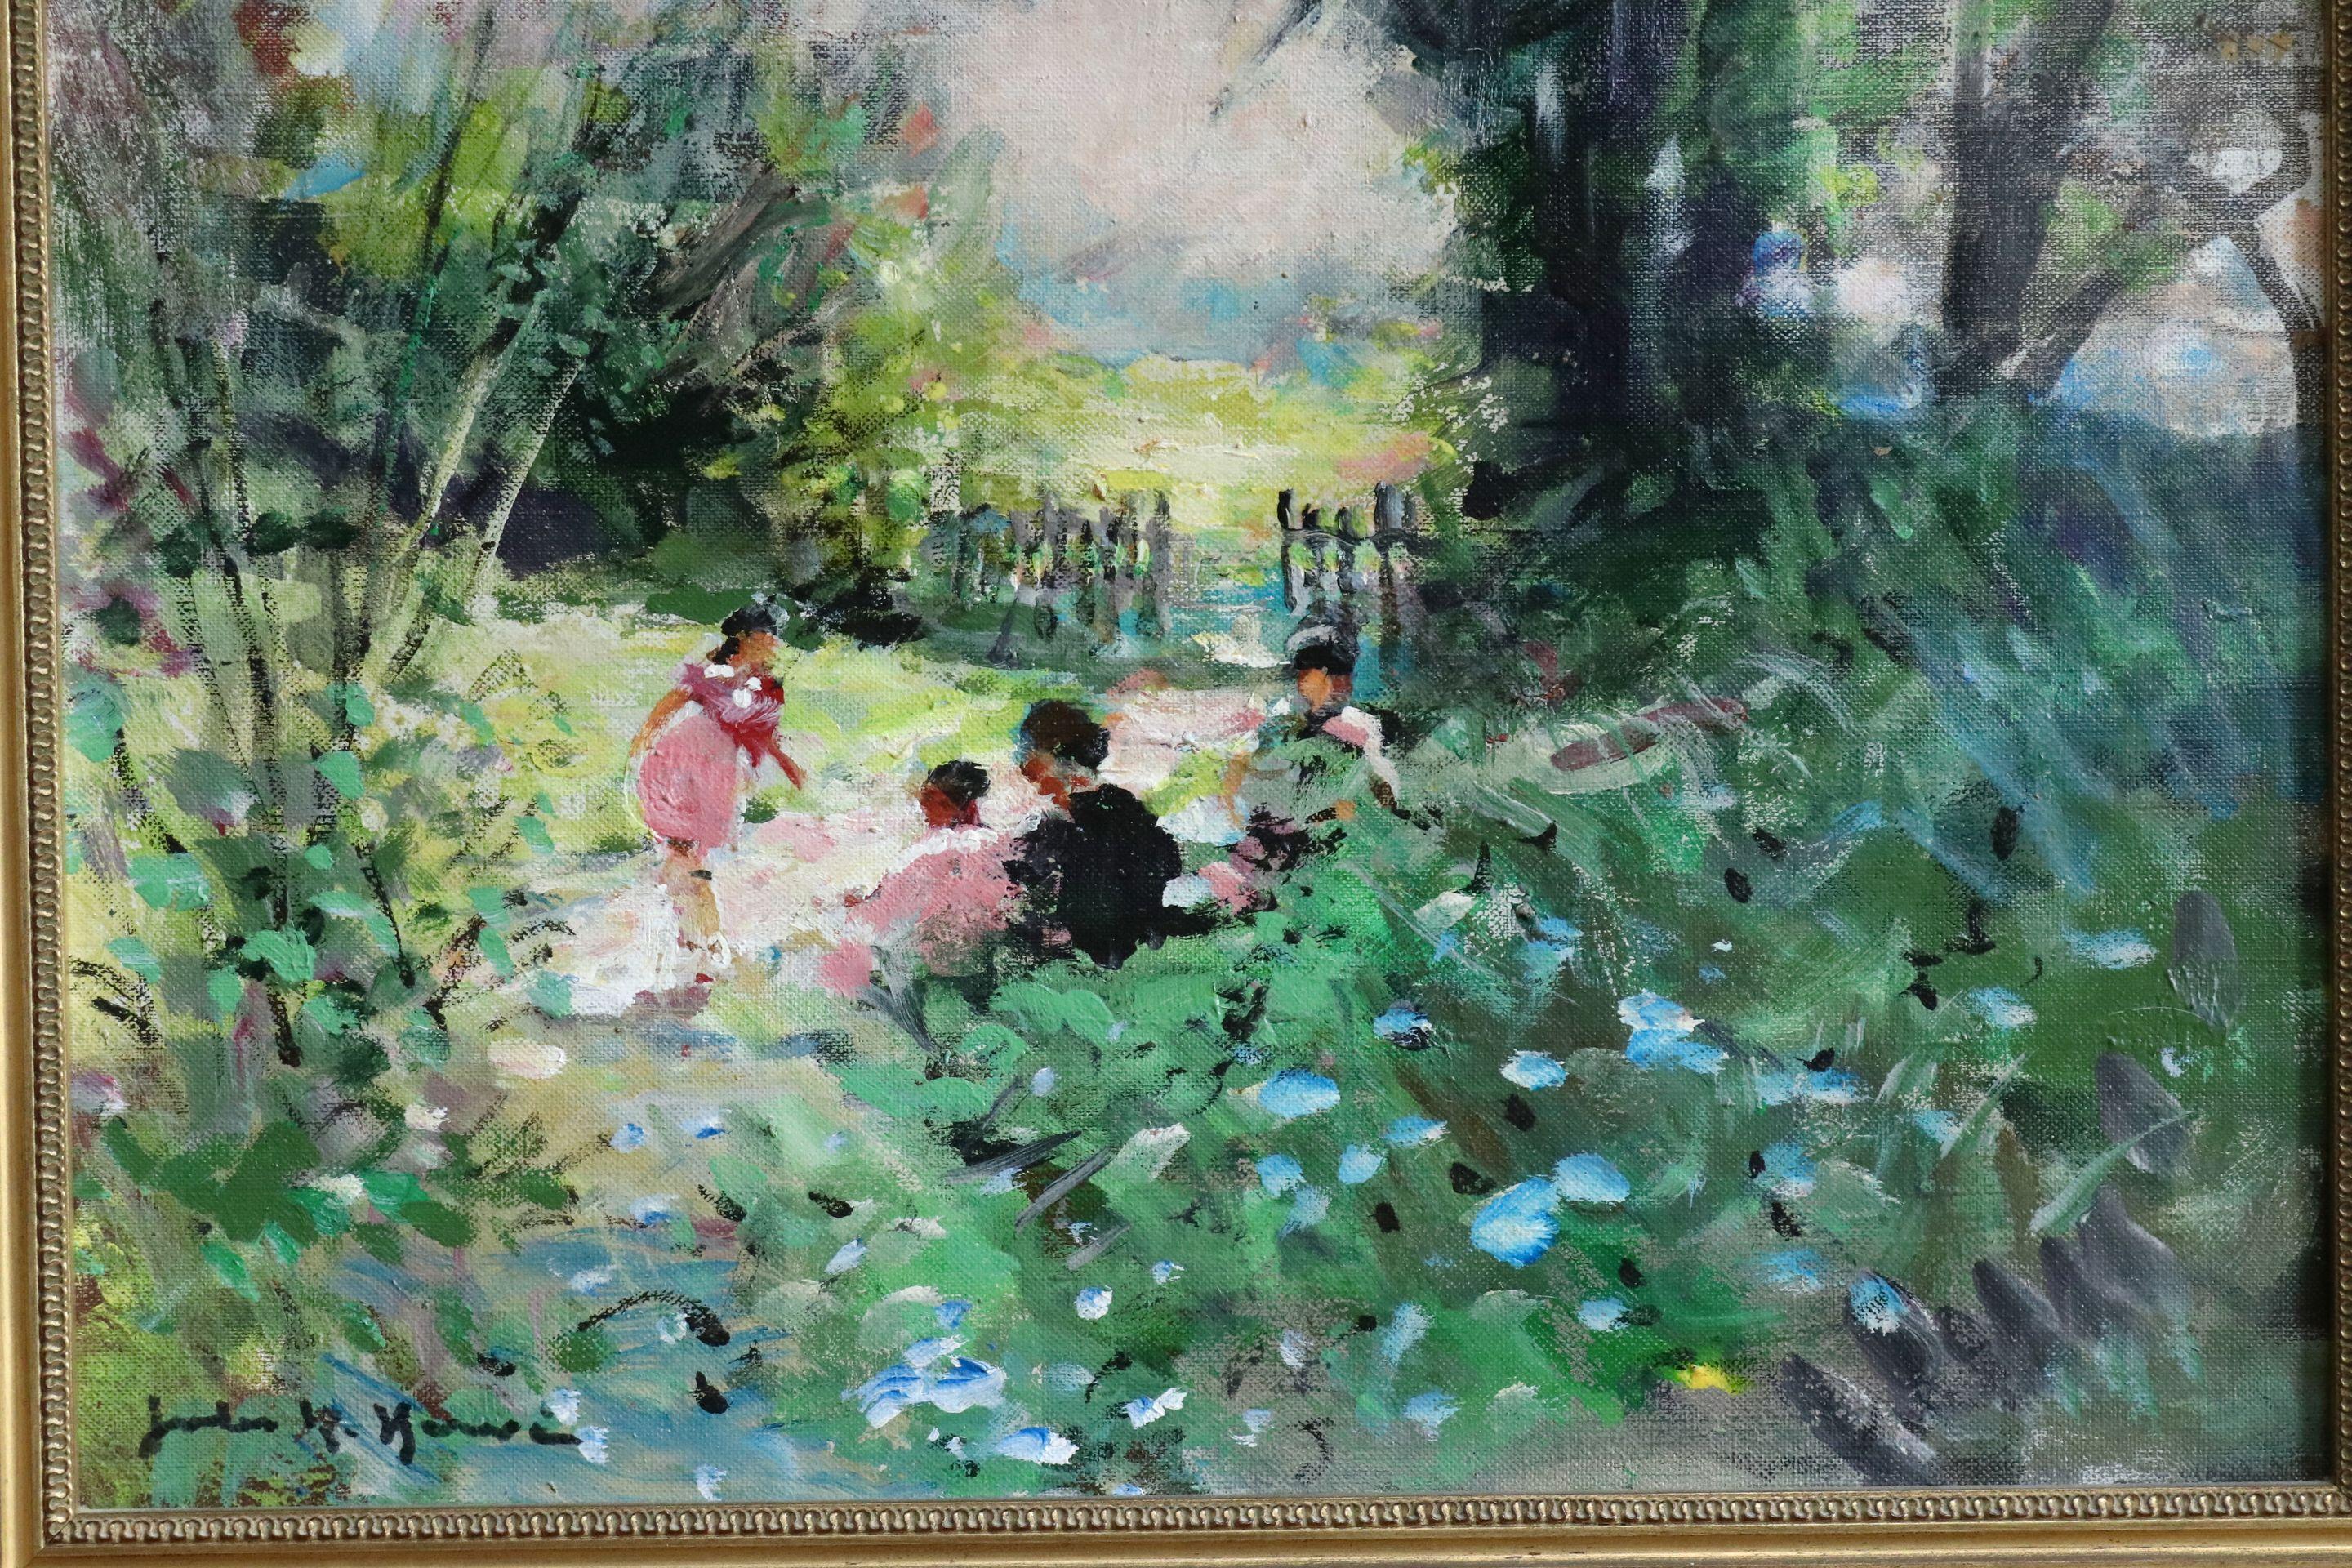 Children Playing - 20th Century Oil, Figures in Landscape by Jules Rene Herve - Gray Figurative Painting by Jules René Hervé